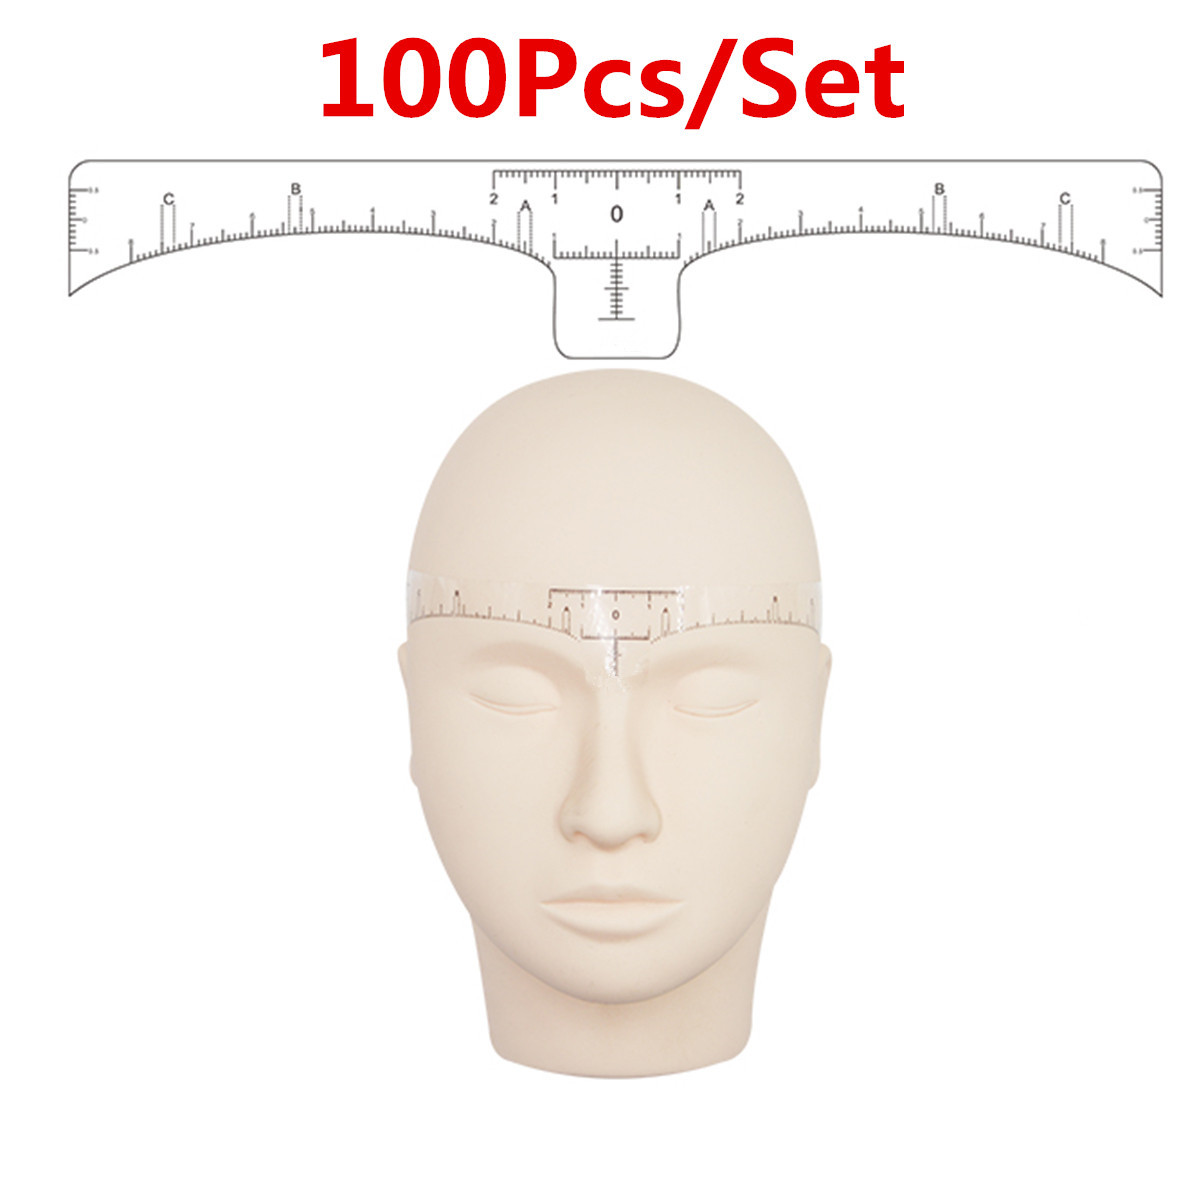 100PCS-Eyebrow-Stencil-One-time-Eyebrow-Grooming-Stencil-Measure-Ruler-Brow-Shaper-Makeup-Shaping-To-1940017-2